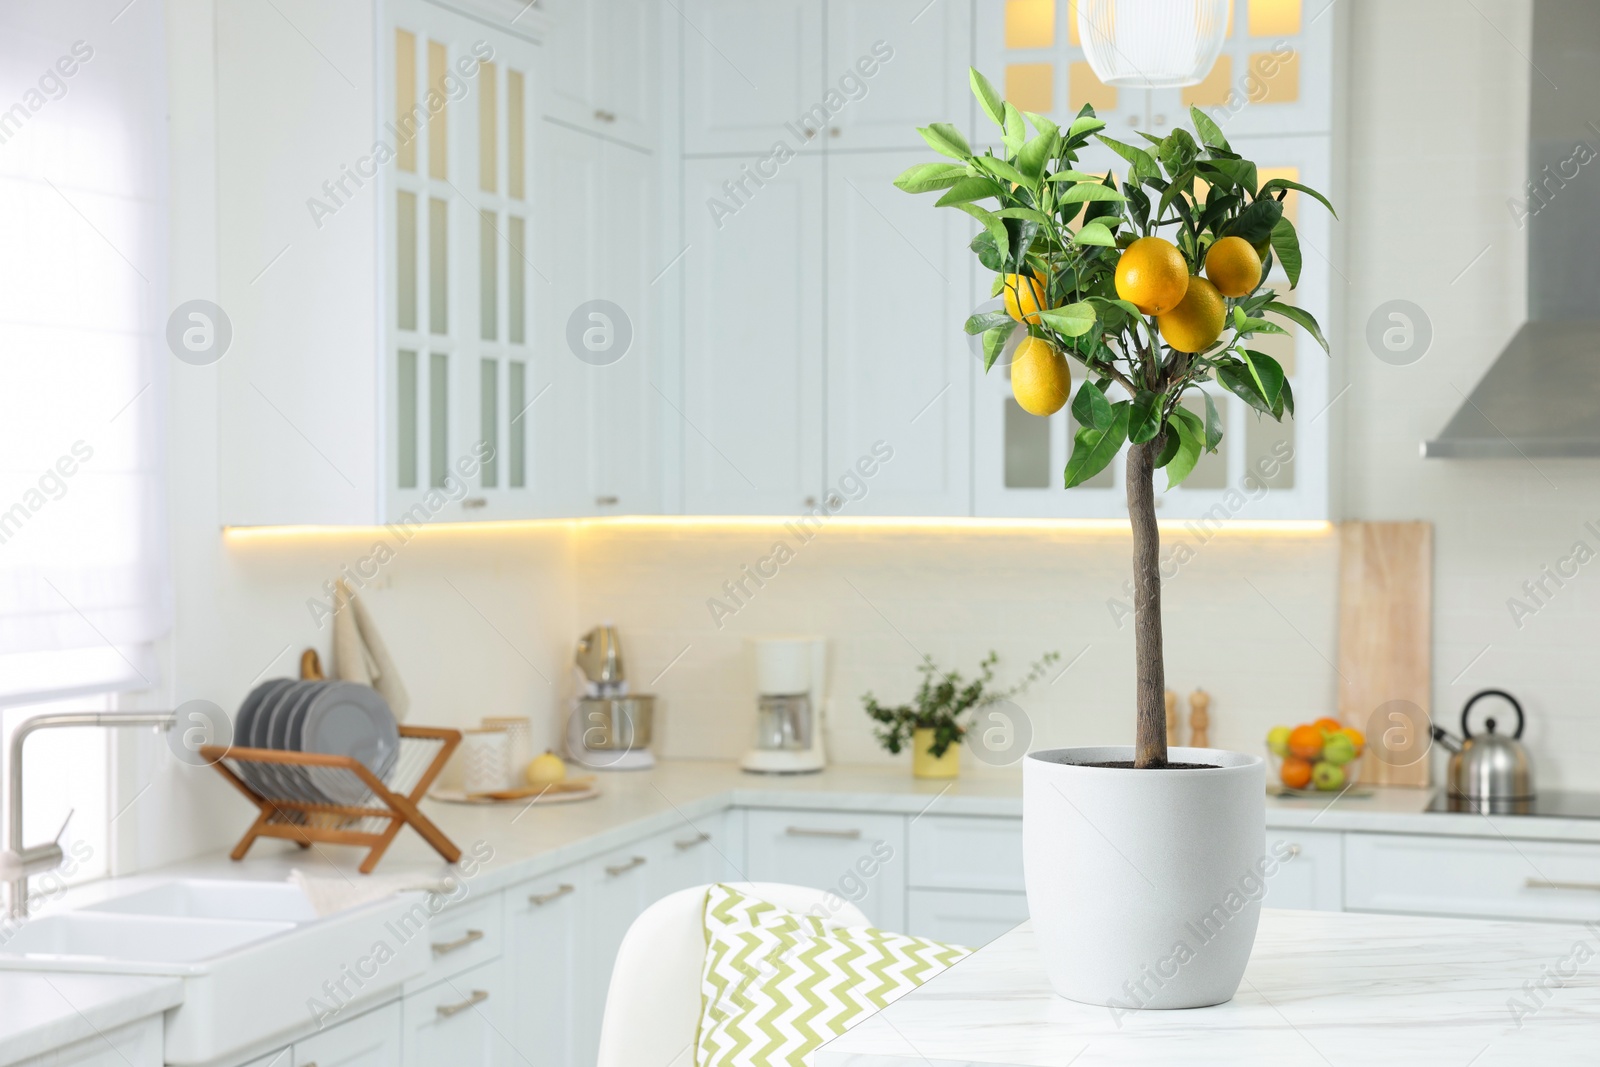 Photo of Potted lemon tree with ripe fruits on kitchen countertop, space for text